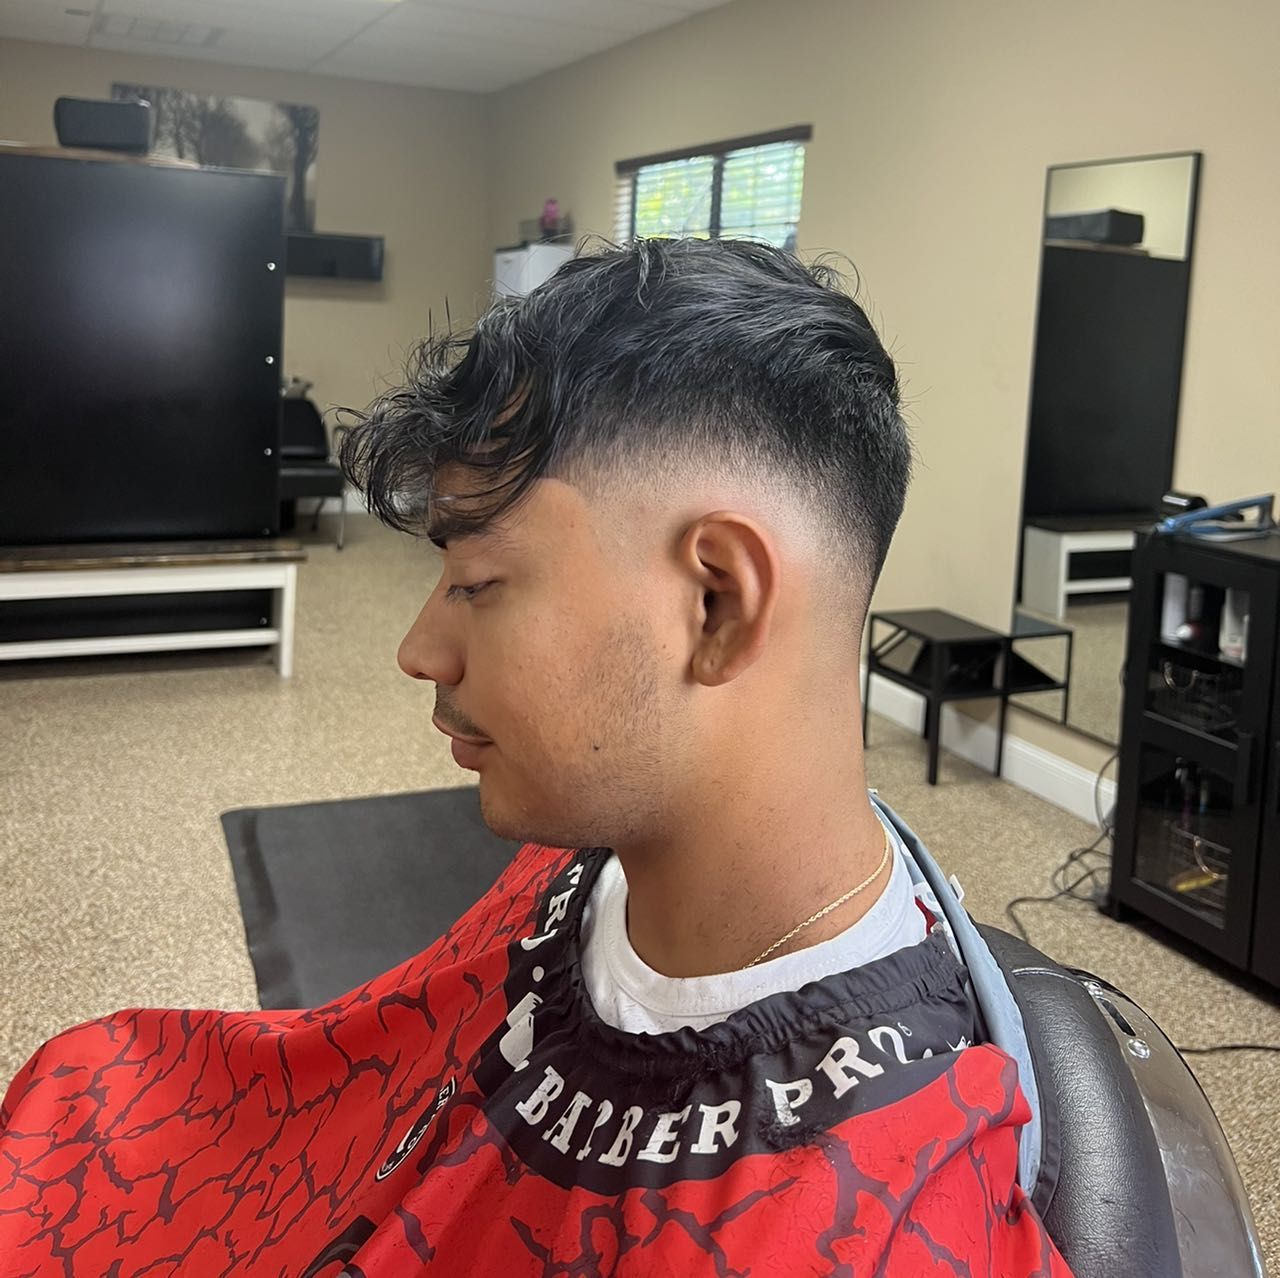 Barber recommendations for this haircut(Hispanic/Asian hair types) : r/tampa